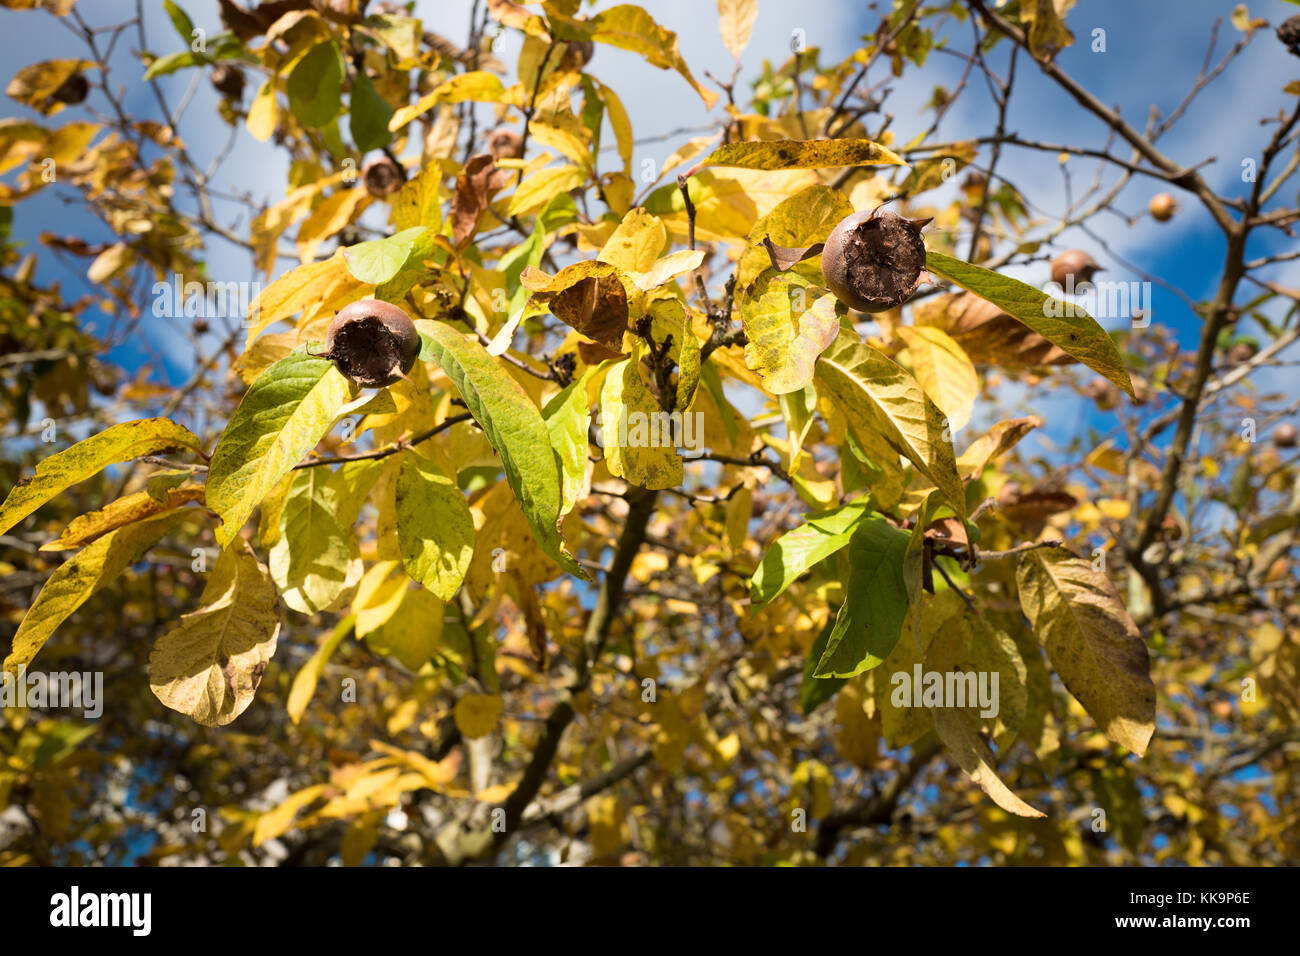 A fruiting Medlar tree growing beside the River Avon in Chippenham Wiltshire England UK in Autumn Stock Photo